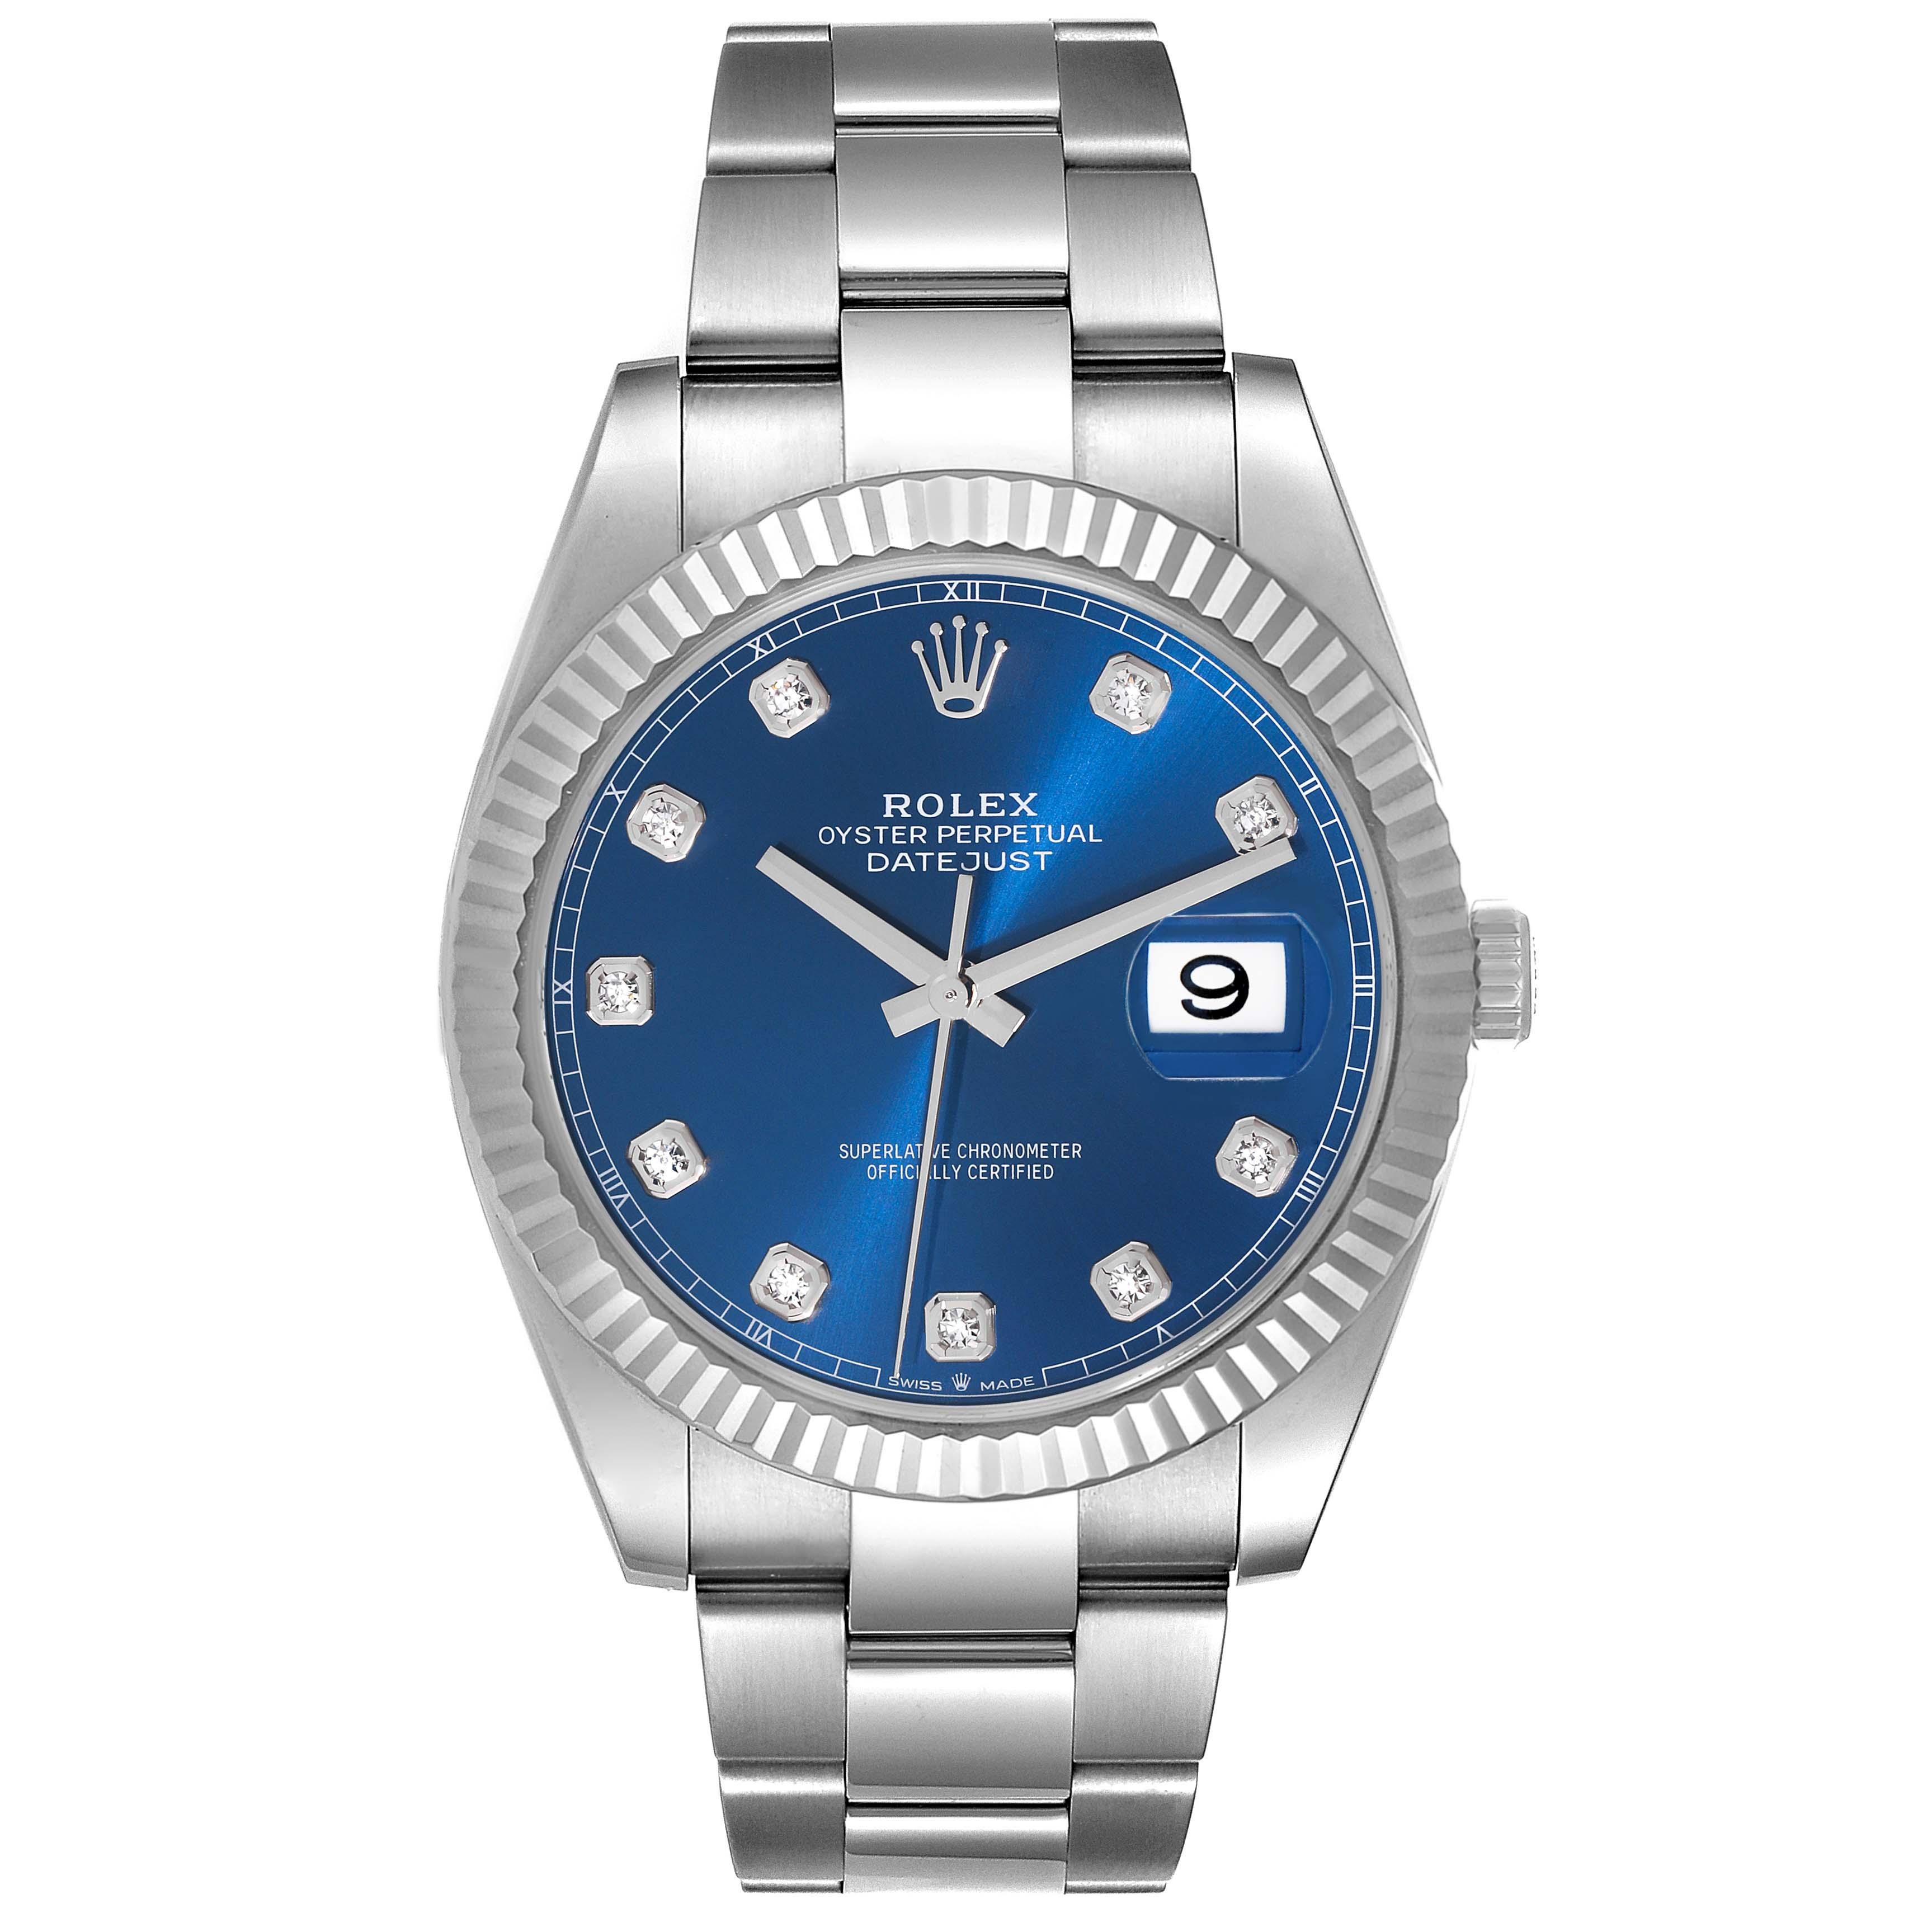 Rolex Datejust 41 Blue Diamond Dial Steel White Gold Mens Watch 126334 Box Card. Officially certified chronometer automatic self-winding movement. Stainless steel case 41 mm in diameter. Rolex logo on a crown. 18K white gold fluted bezel. Scratch